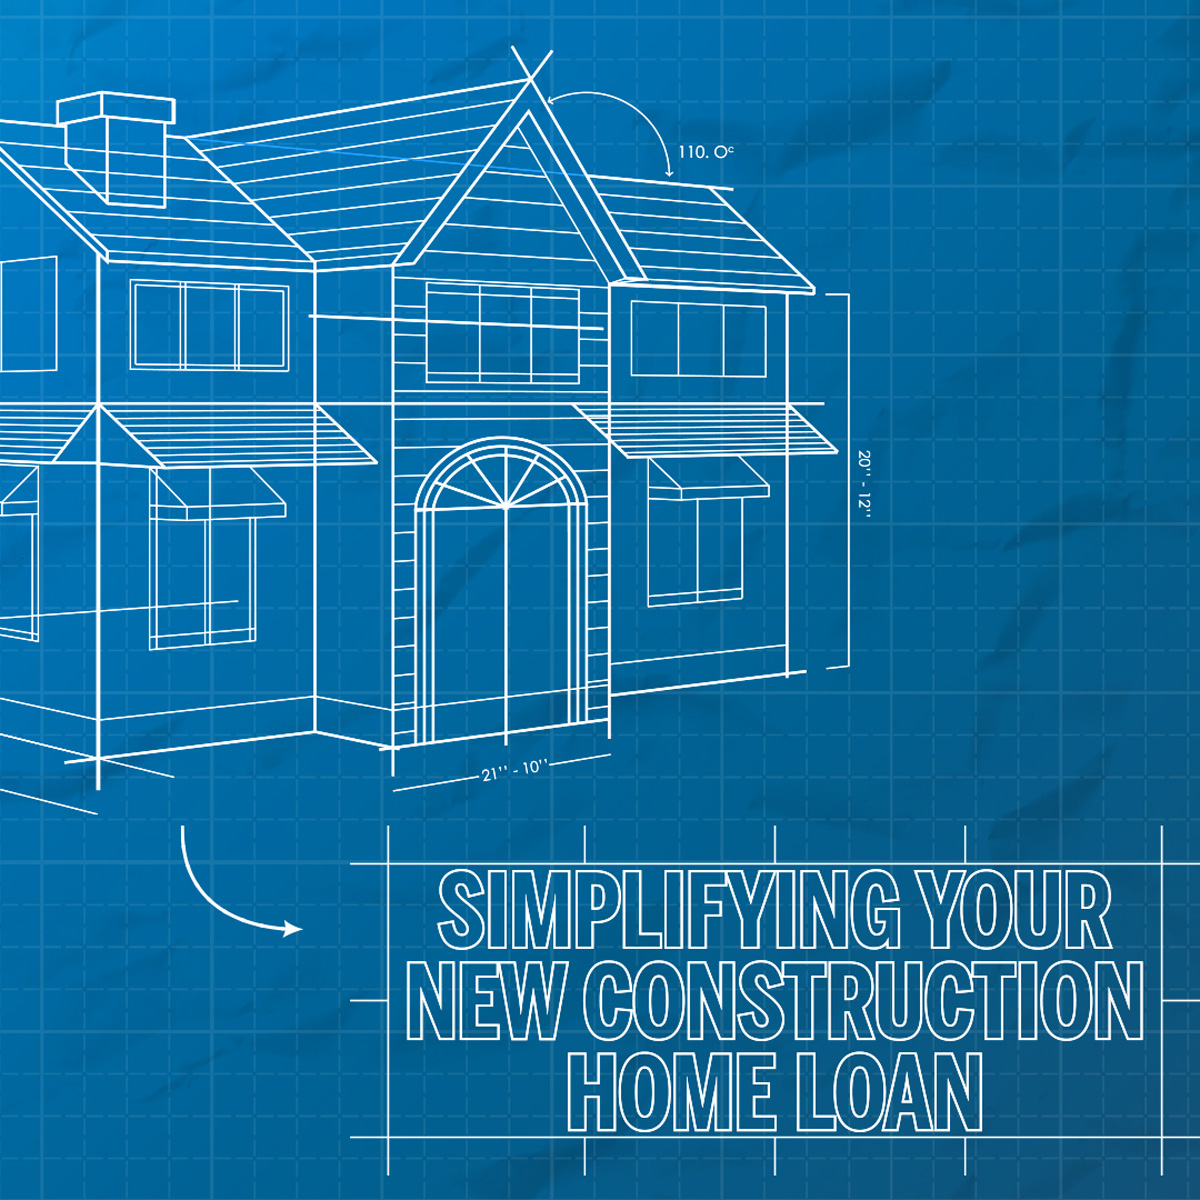 Ready to build your dream home? Our new construction home loans make it easy with one closing, one interest rate, one down payment, and one approval. Plus, you have the option to modify down if the market improves. Let's simplify your home building journey! #ConstructionLoans